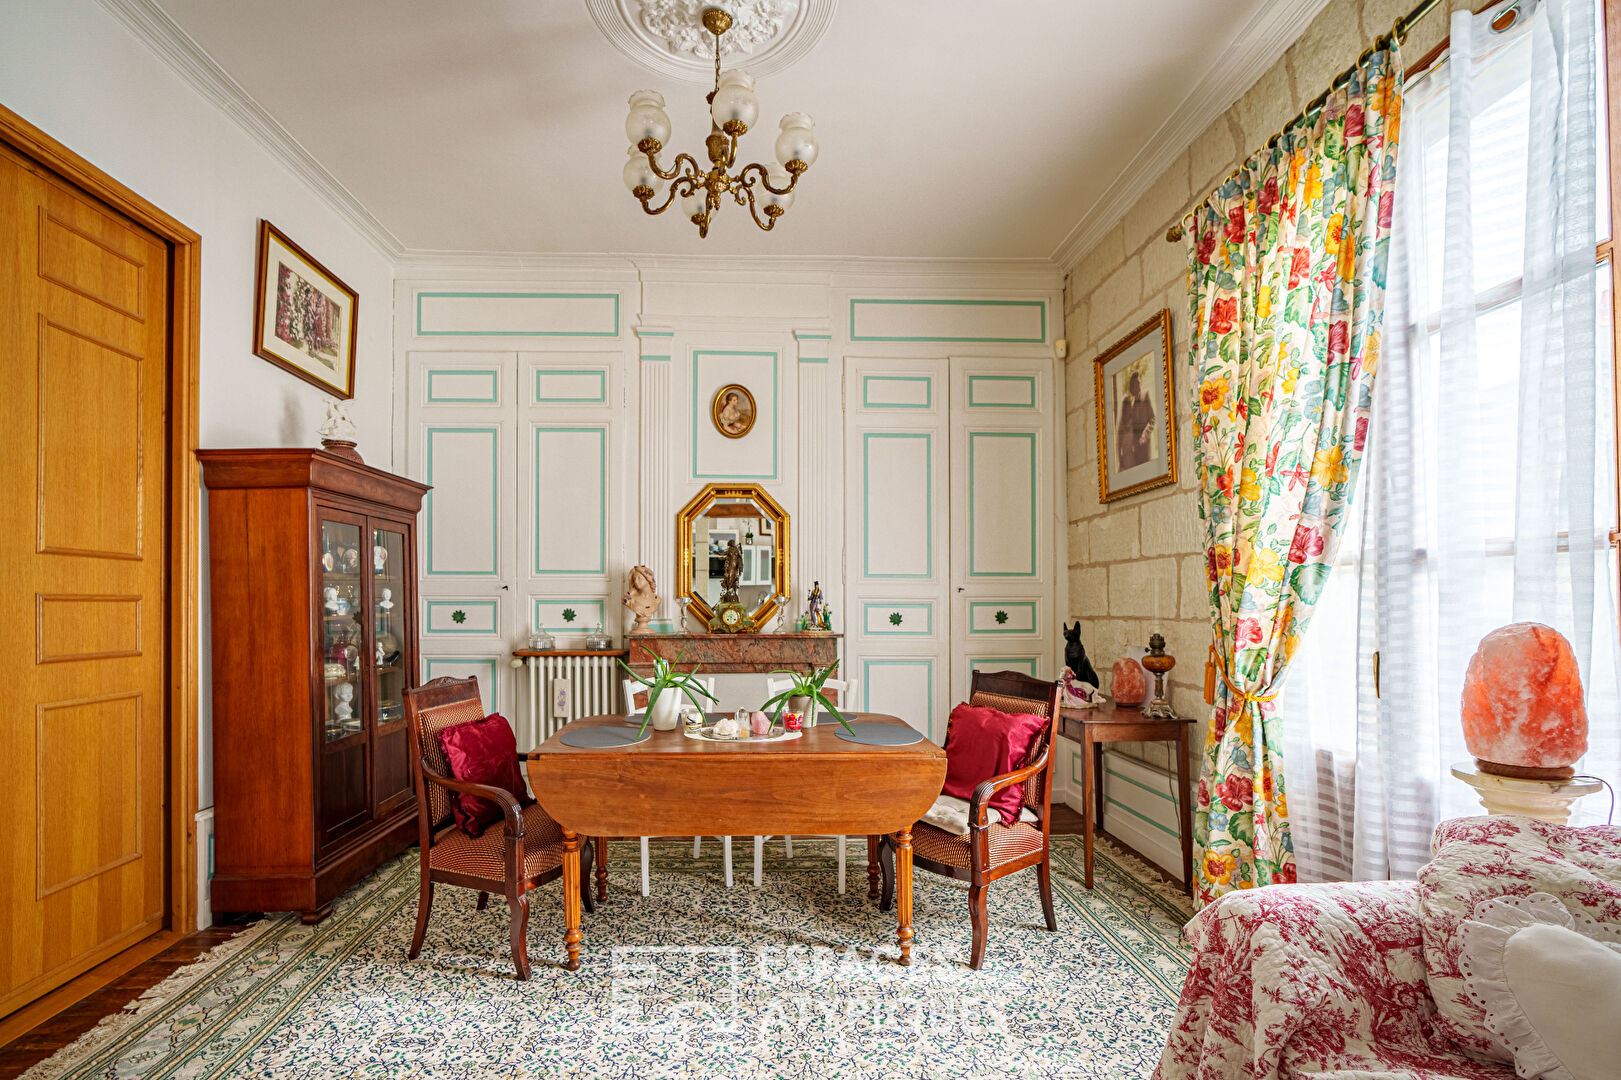 Private mansion: volumes and authenticity in the city center